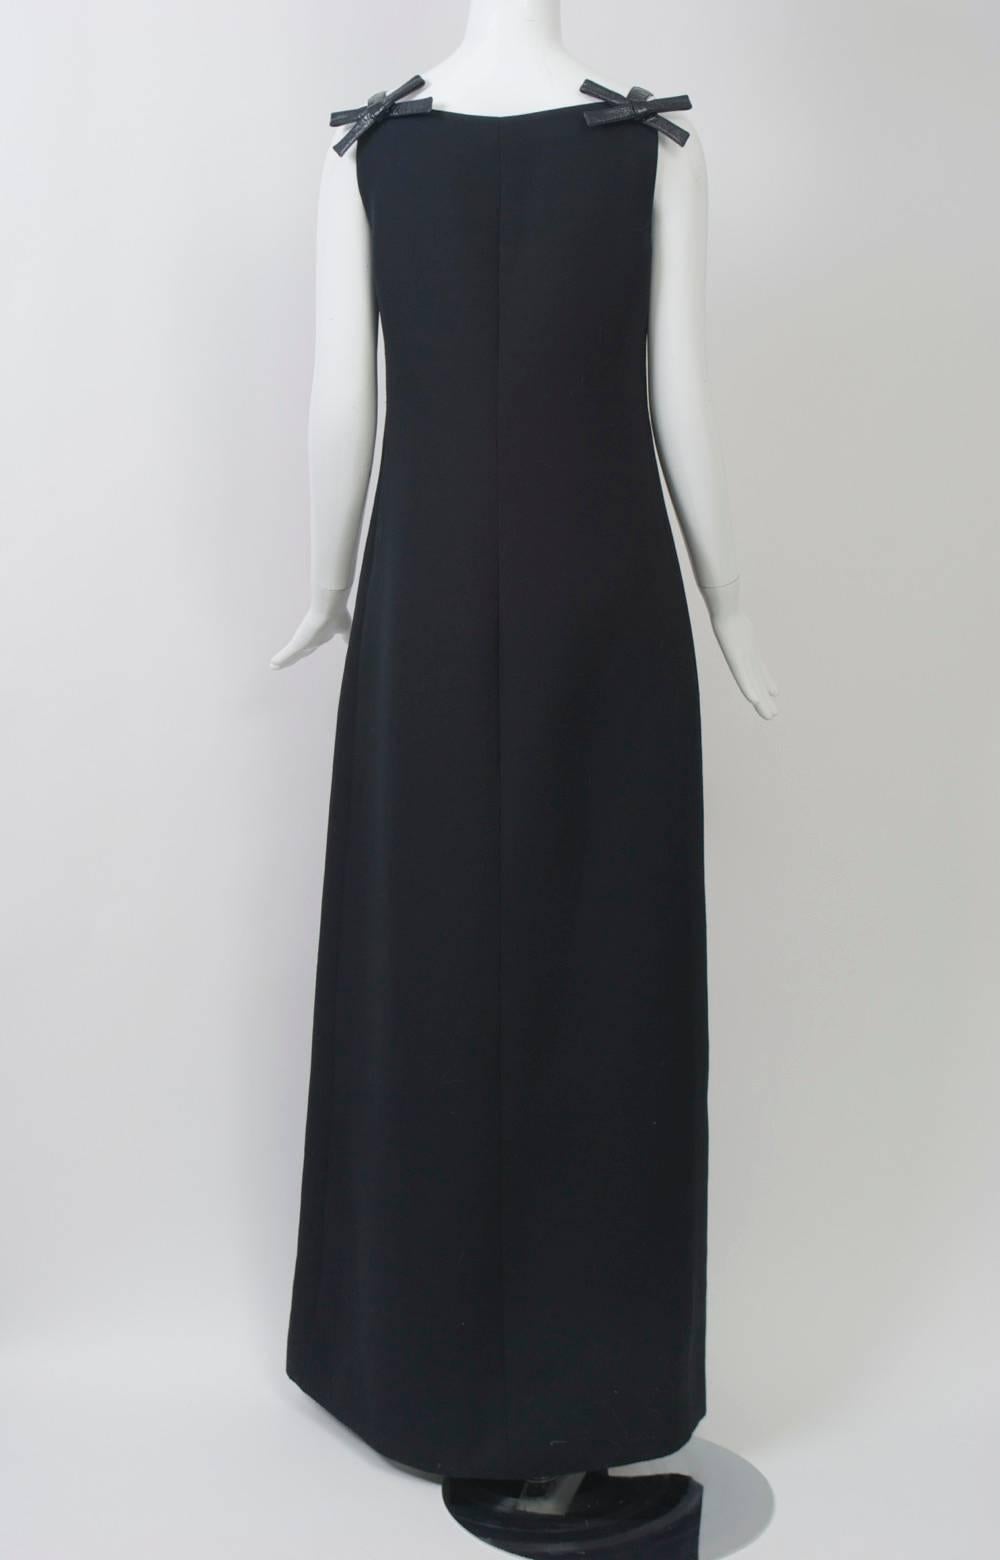 André Courrèges maxi dress, c.1970, in black polyester with square neckline and narrow shoulder straps in black patent leather terminating in bows front and back. Simple, body skimming shape with A-line skirt. Side zipper. Lined. Labeled size 